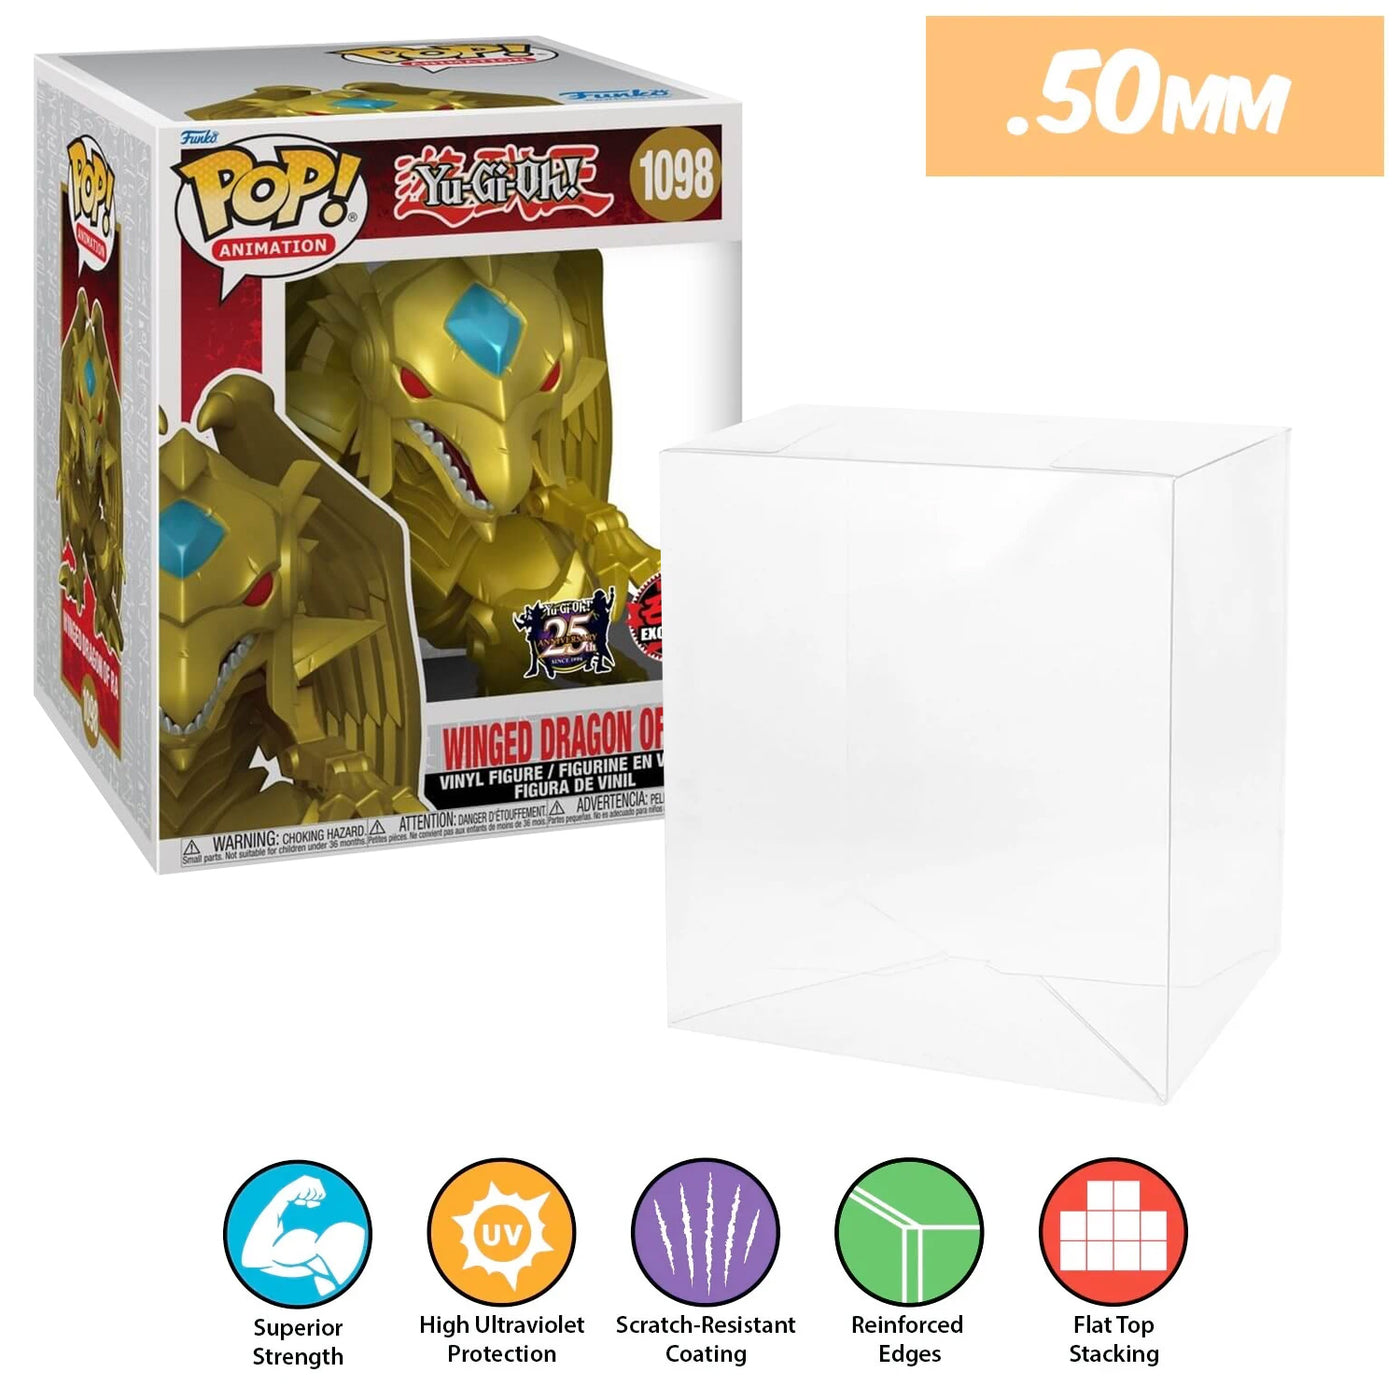 6 inch winged dragon of ra 1098 best funko pop protectors thick strong uv scratch flat top stack vinyl display geek plastic shield vaulted eco armor fits collect protect display case kollector protector